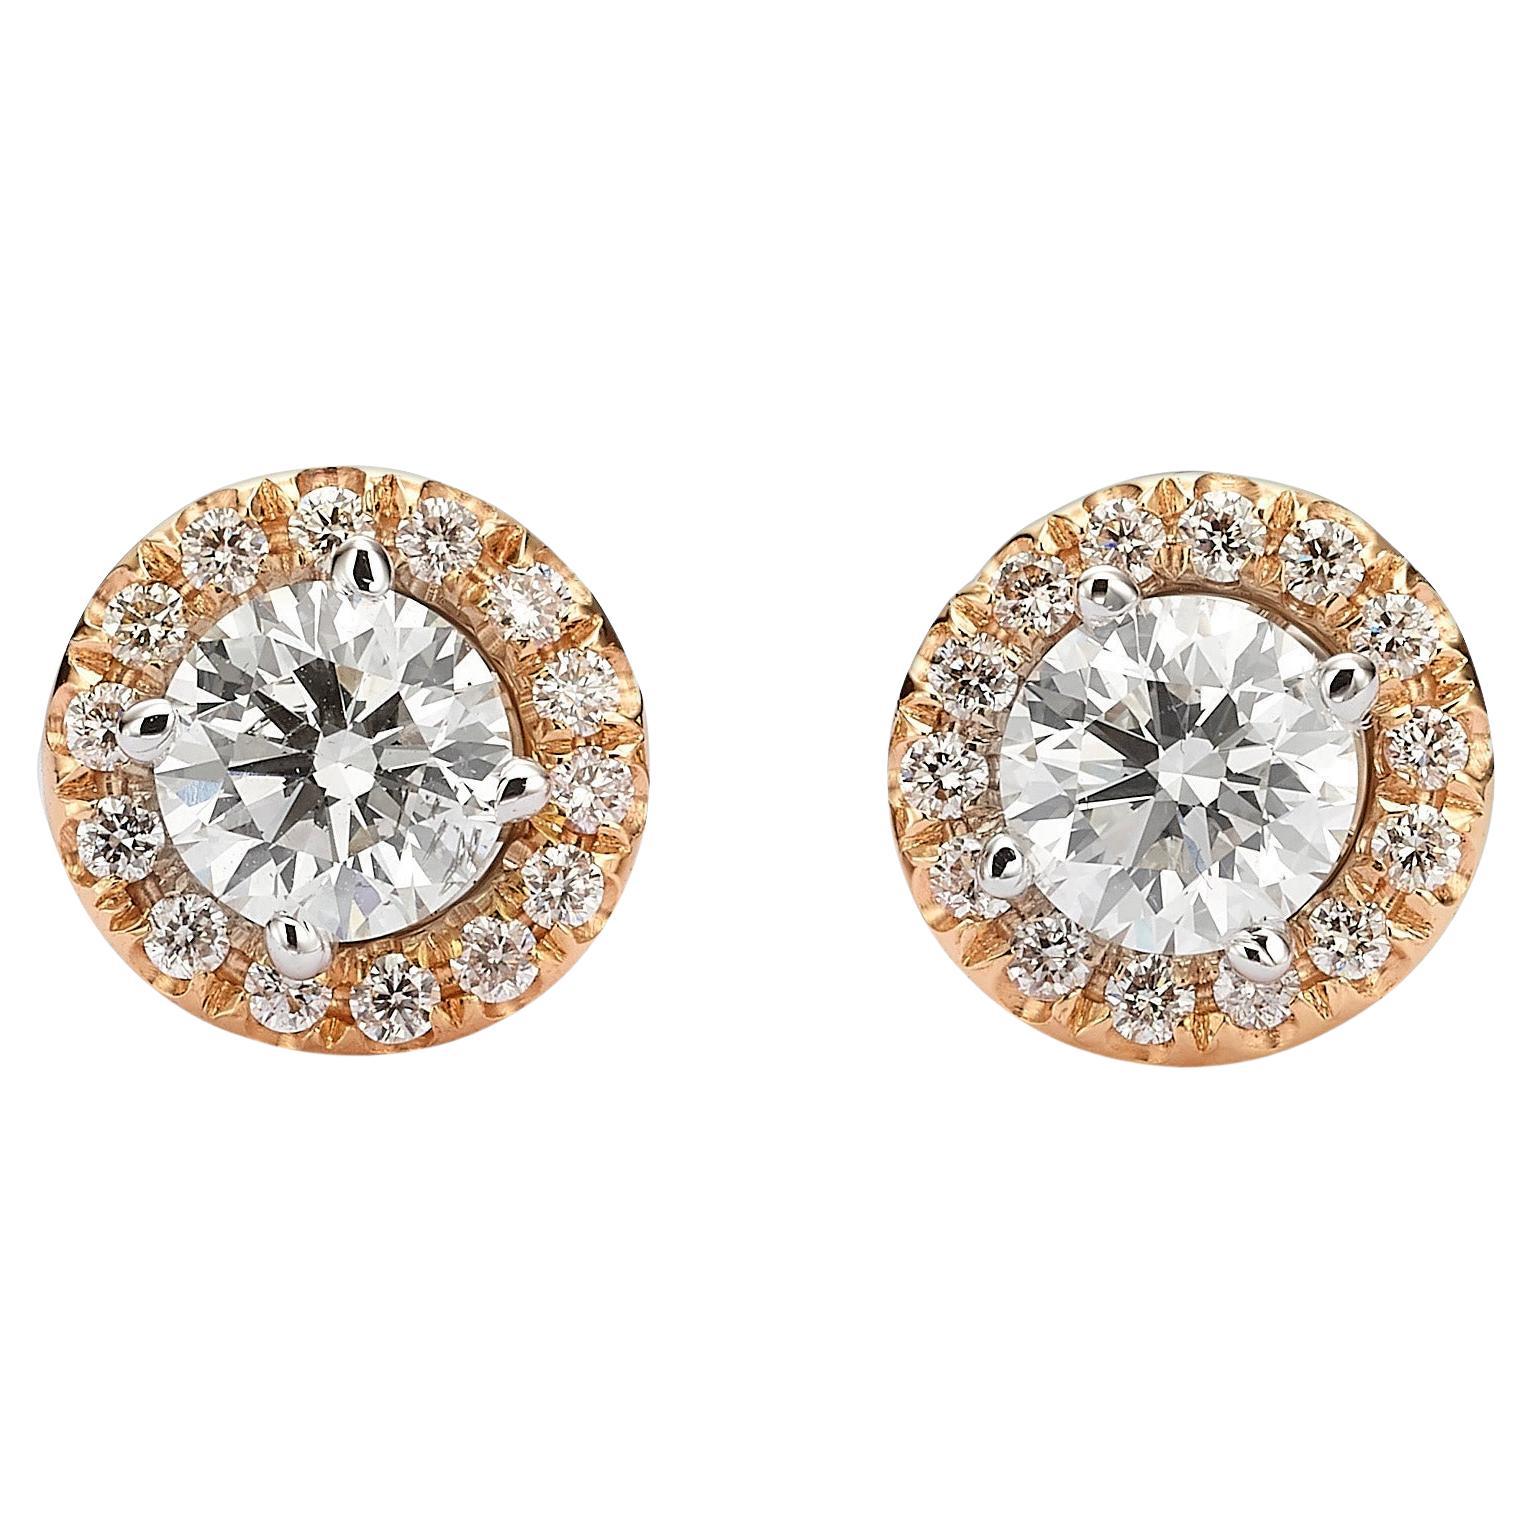 2.98 TCW Diamonds White & Rose Gold Earrings For Sale